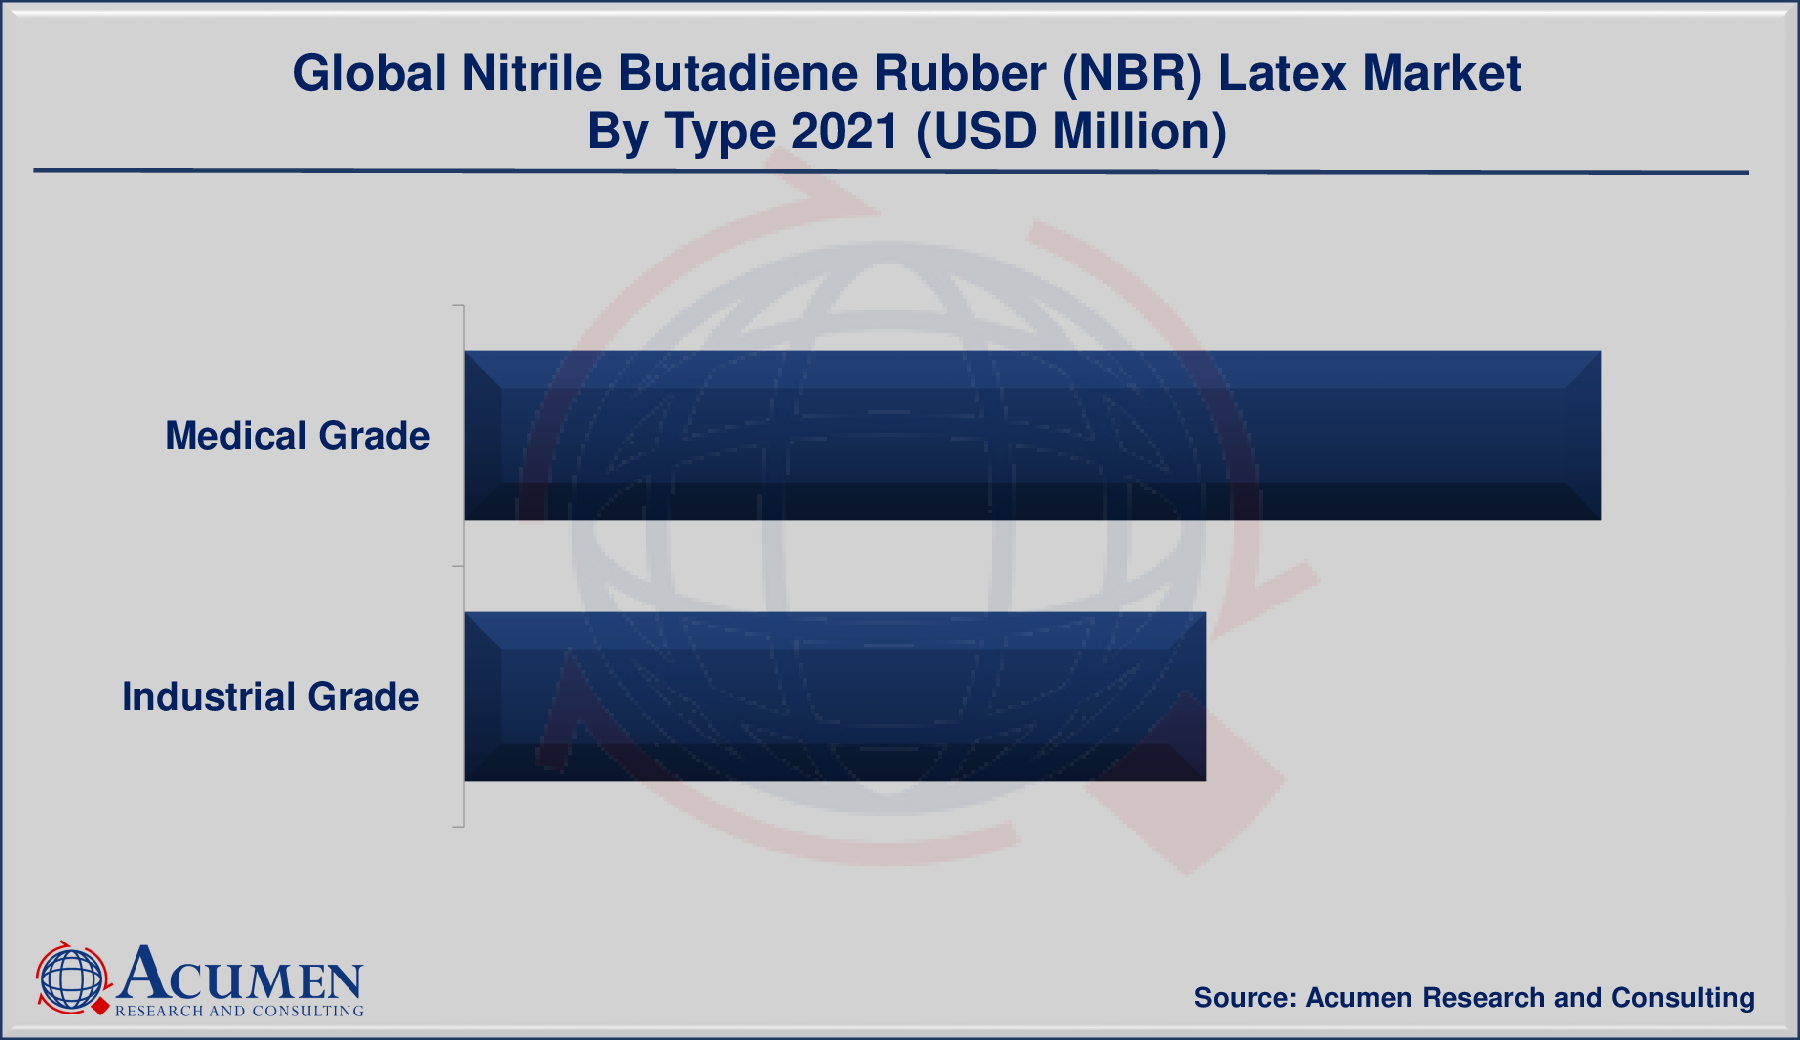 Nitrile Butadiene Rubber Latex Market By Type is predicted to be worth USD 3,014 Million by 2028, with a CAGR of 10.6%